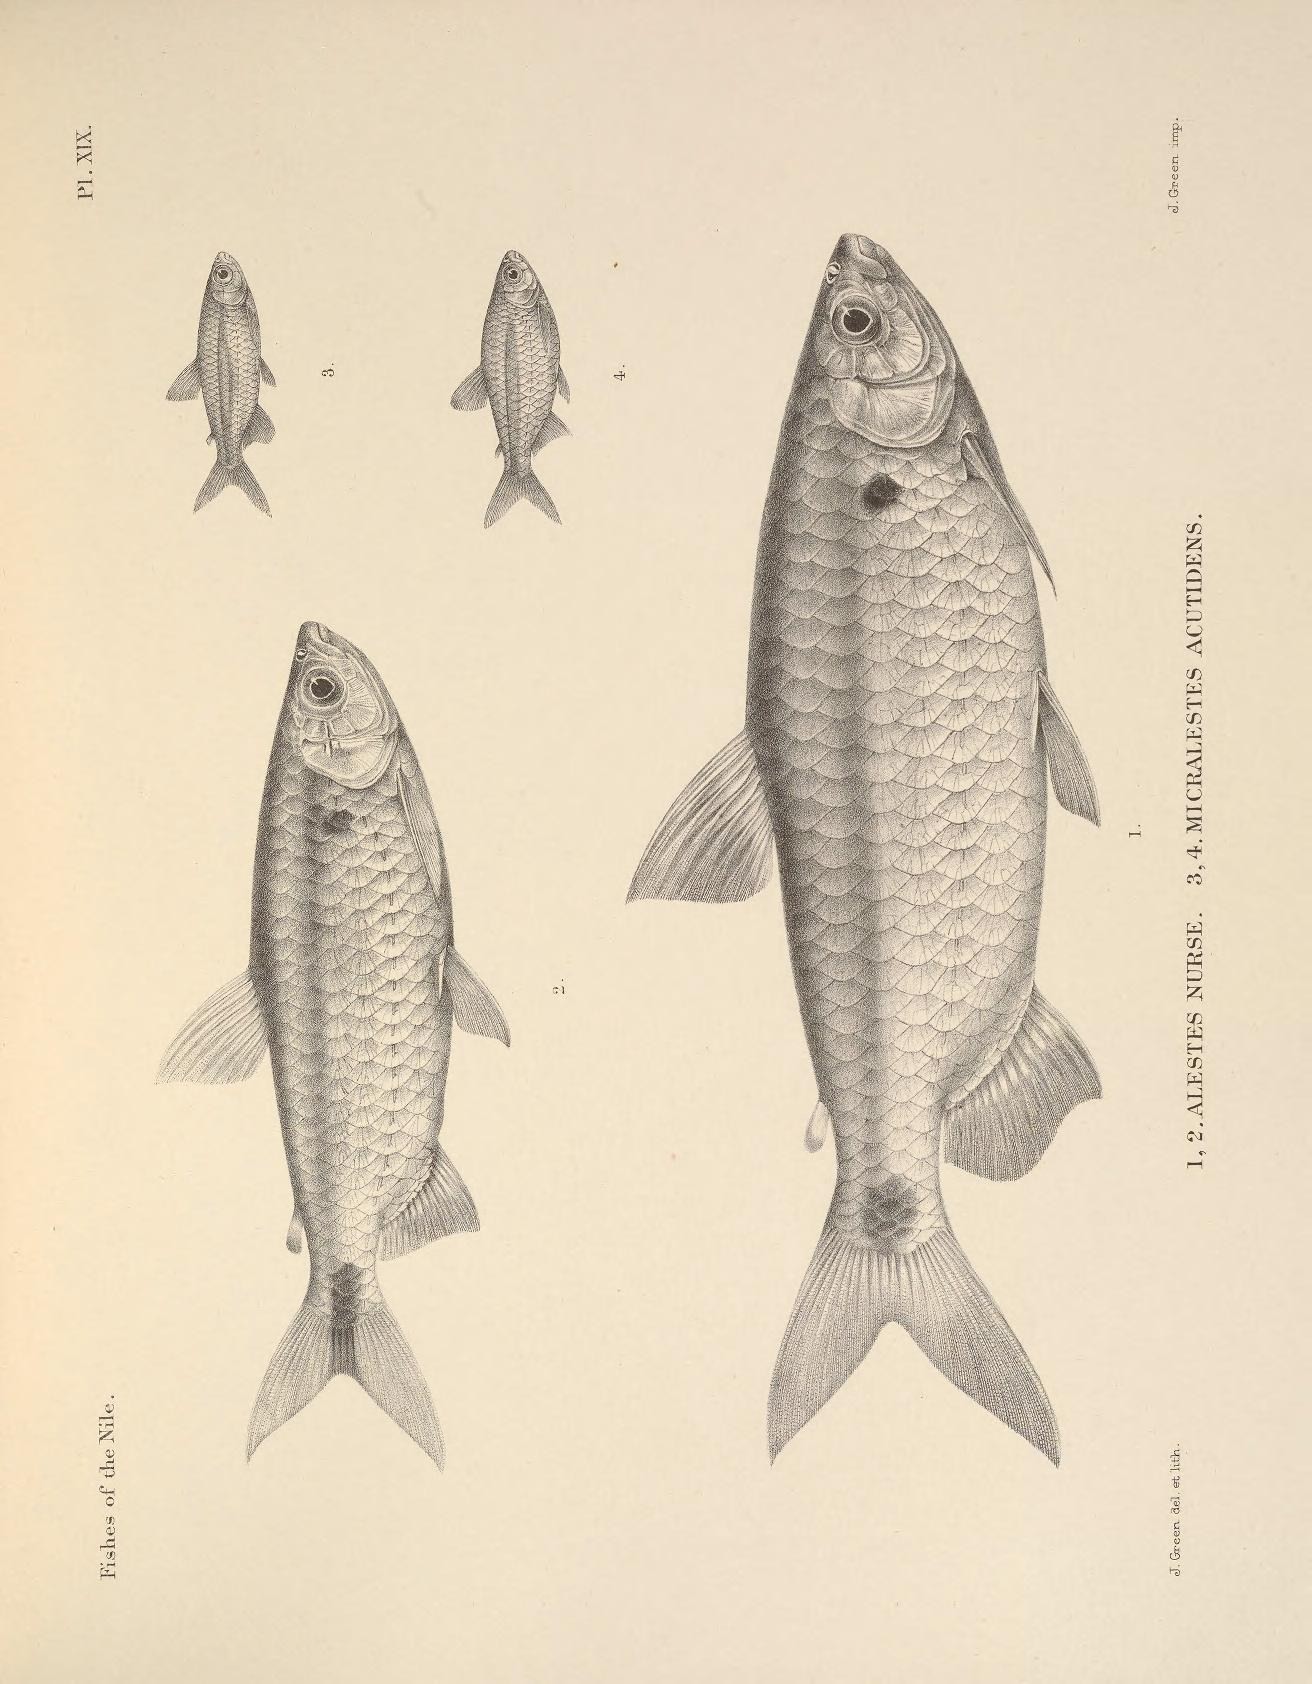 an illustration of different fish in an old book